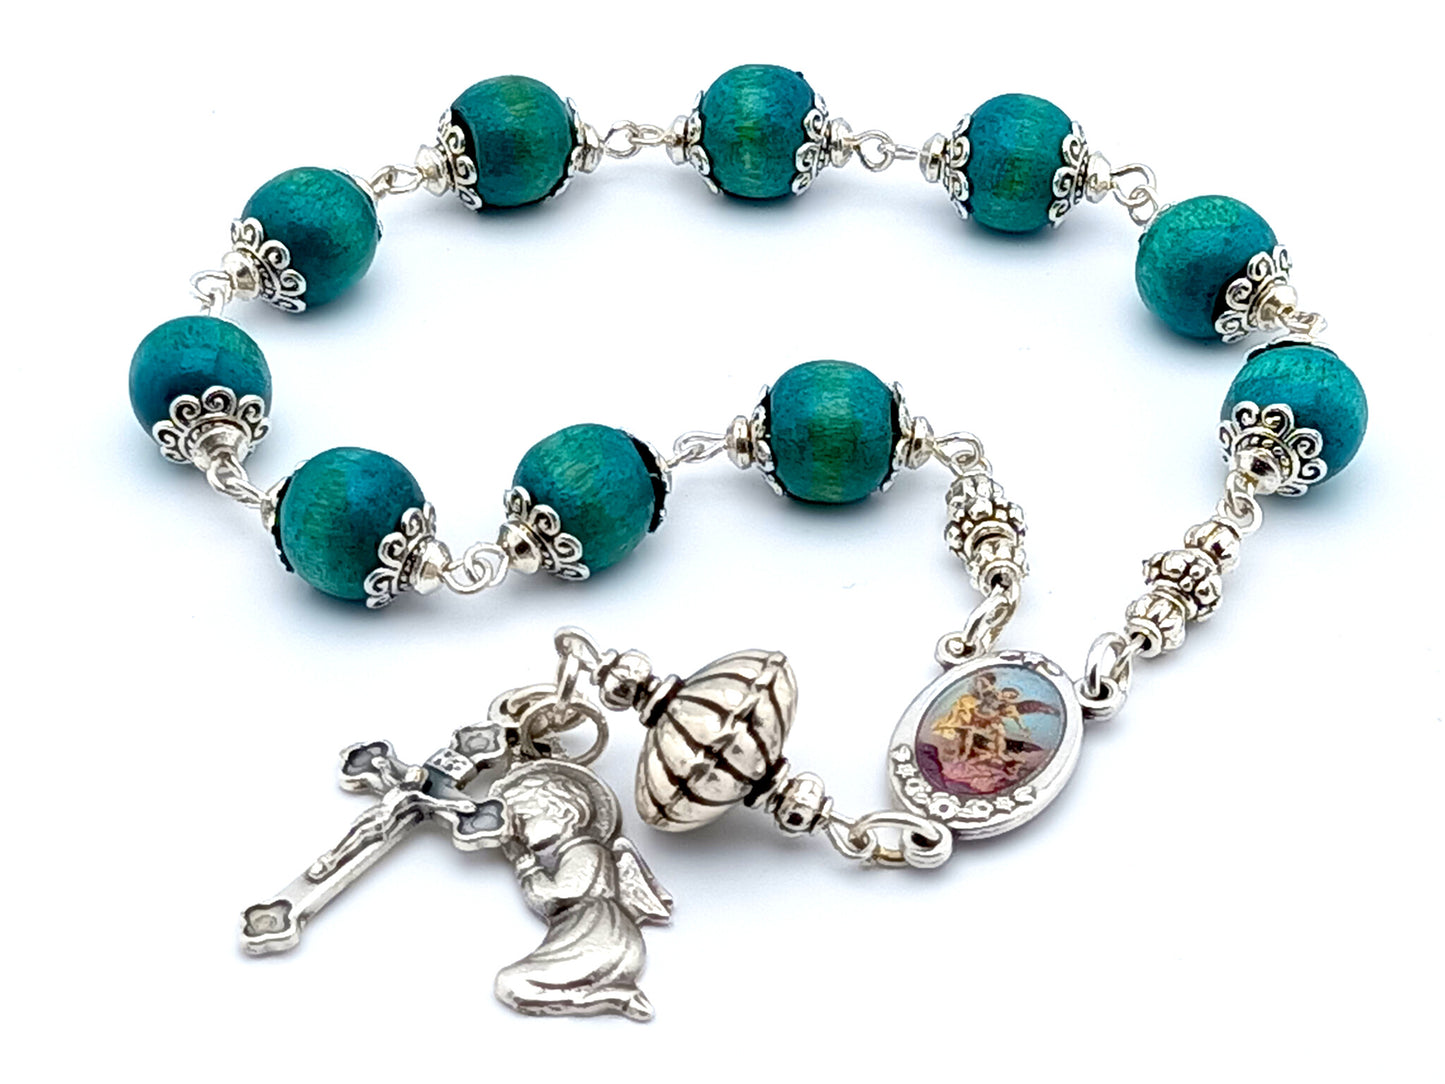 Saint Michael unique rosary beads single decade rosary with green wooden and silver beads, picture centre medal and silver end medal and crucifix.